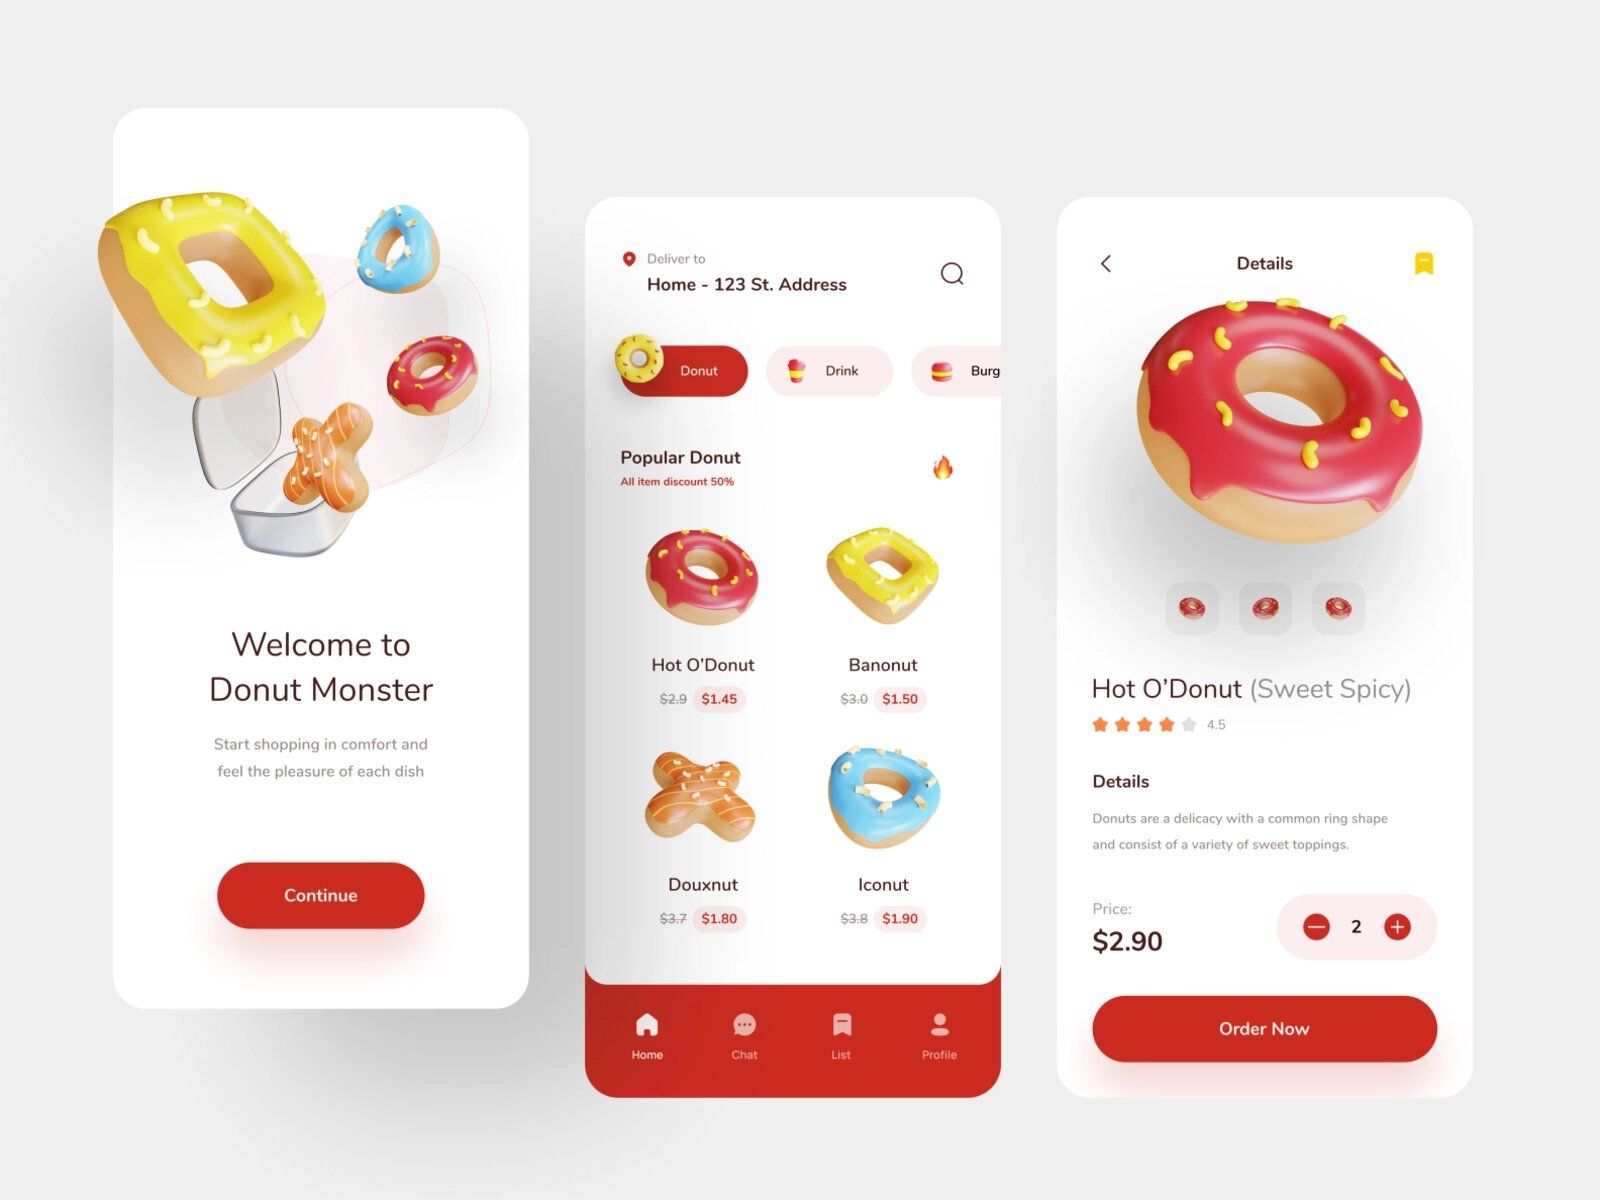 Food delivery apps like UberEats should have a screen with all available restaurants listed (*image by [Farhan Fauzan](https://dribbble.com/Farhangeek){ rel="nofollow" target="_blank" .default-md}*)